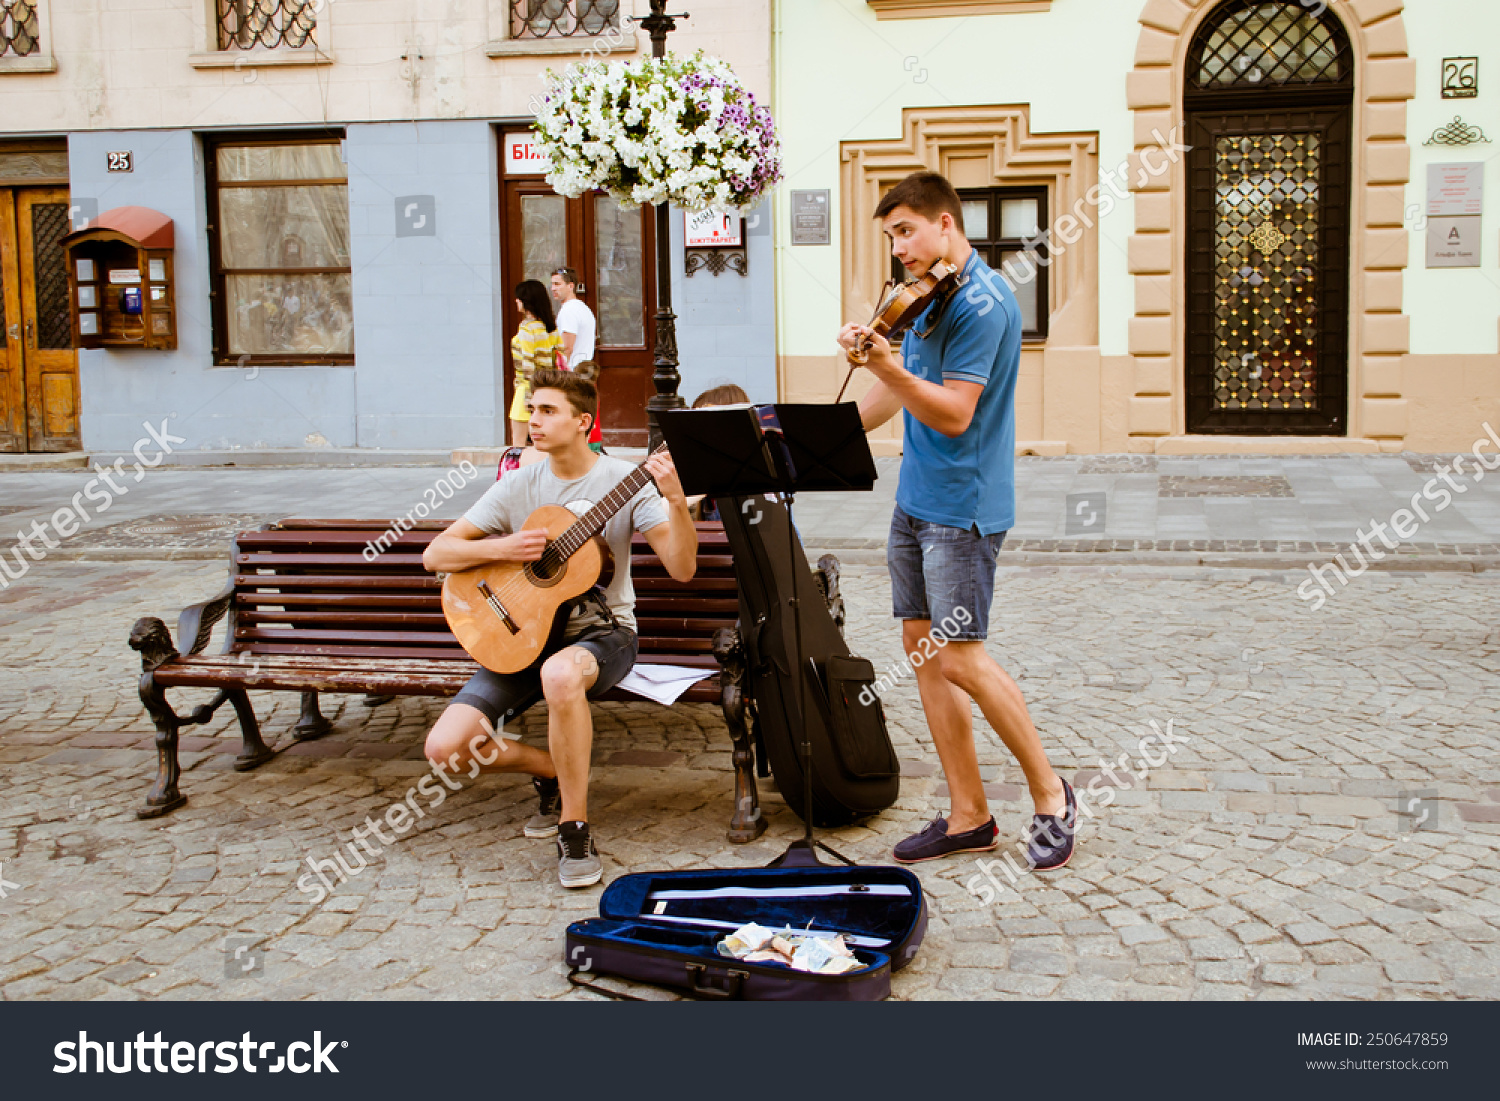 LVIV, UKRAINE - JULY 22: Street musicians on a central square of the city in the Ukraine on July 22, 2014 in Lviv. #250647859